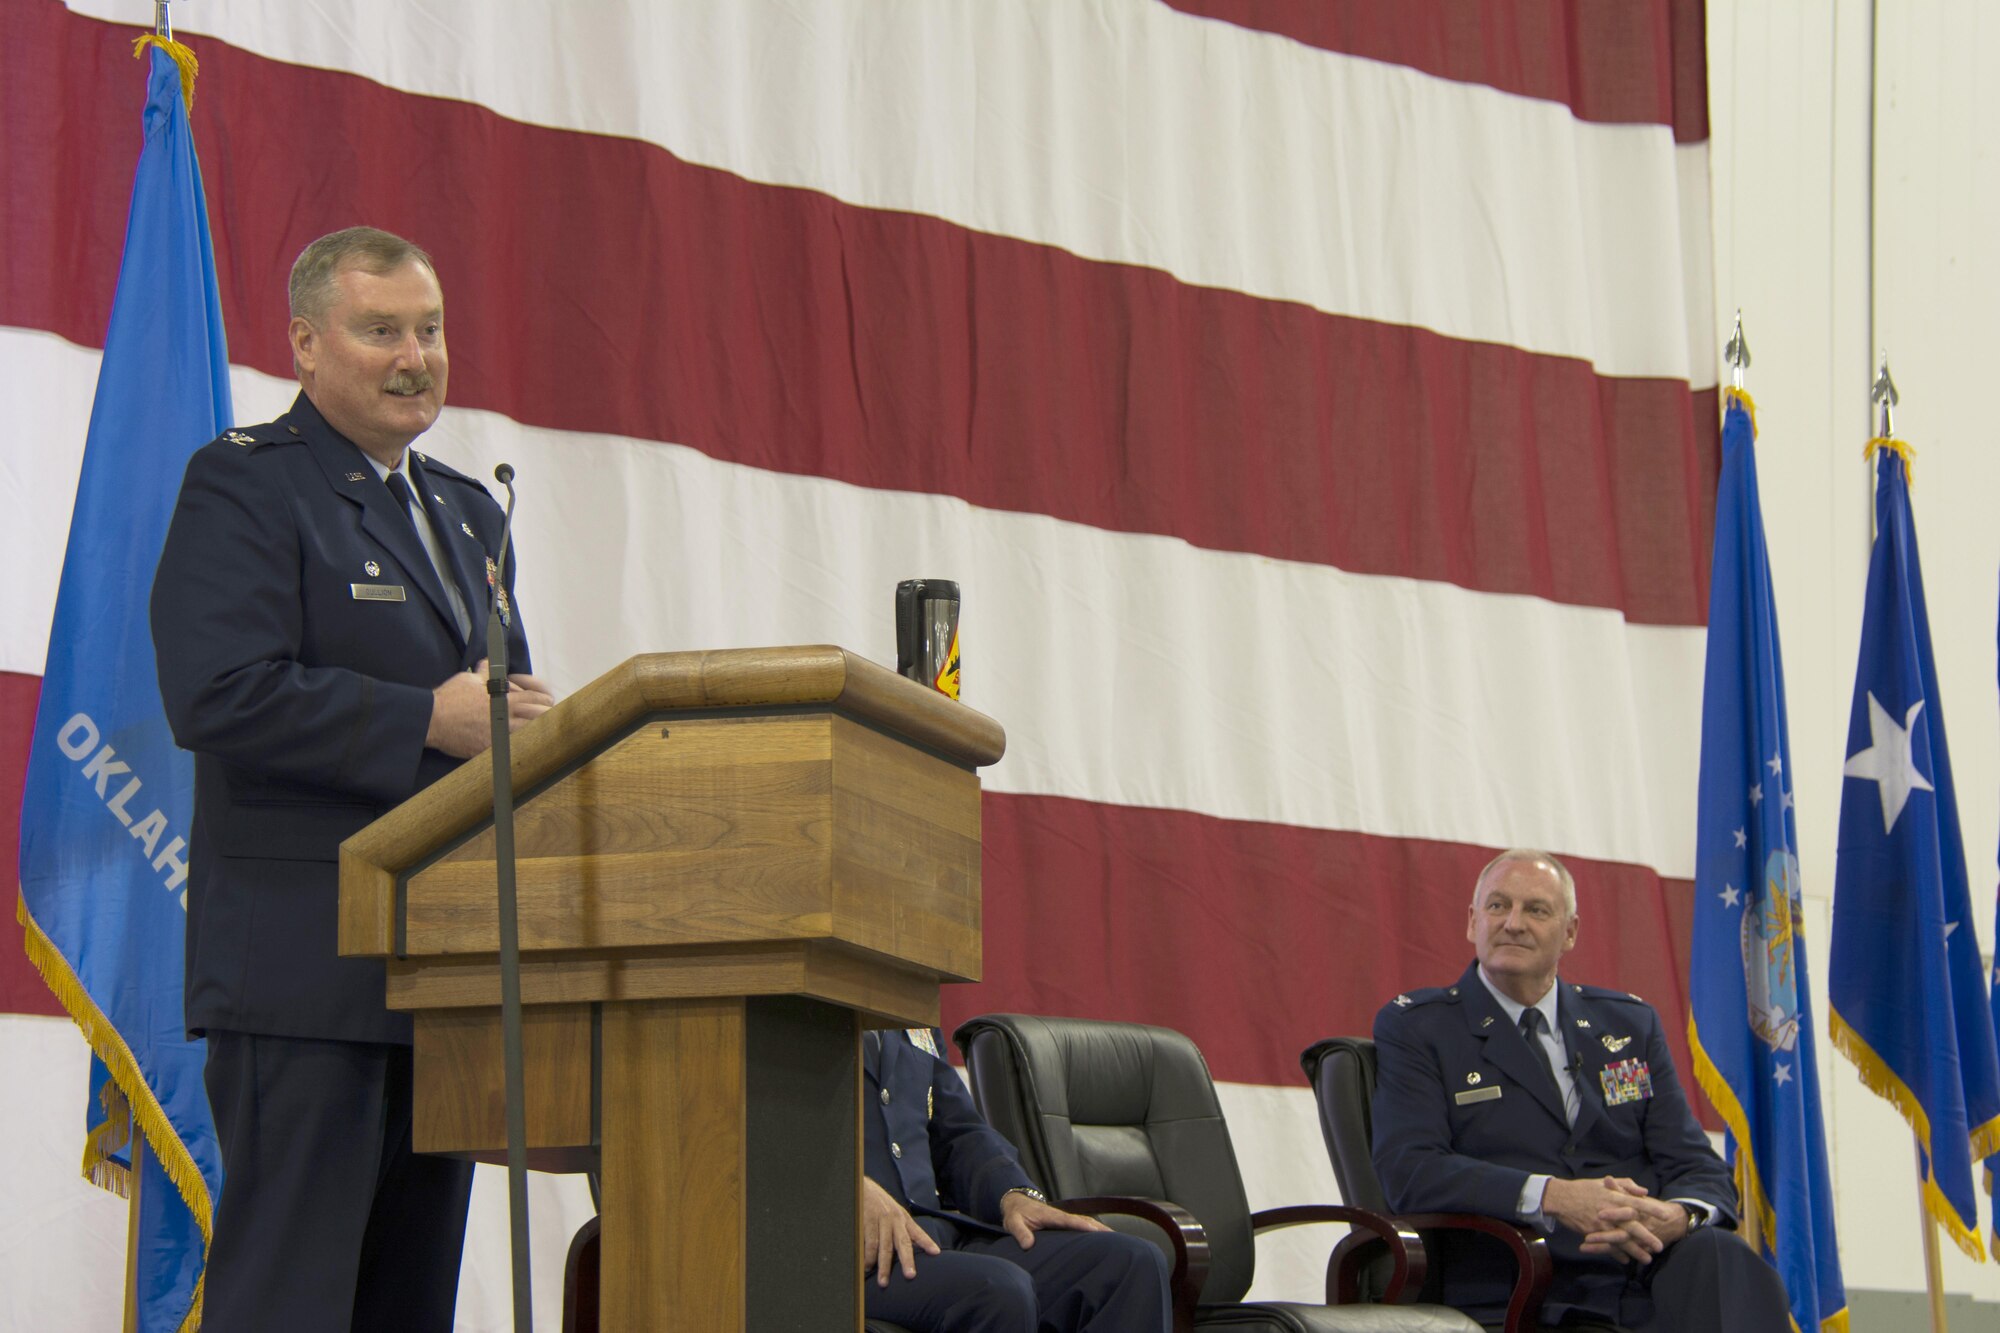 Col. Douglas E. Gullion, 507th Air Refueling Wing commander, addresses the wing as former commander, Col. Brian S. Davis, looks on at the wing change of command ceremony April 2, 2016, at Tinker Air Force Base. Gullion took command of the wing after serving as the 507th Operations Group commander, and now will lead the 1,110 Airmen in the 507th ARW, the largest Reserve flying unit in the state of Oklahoma. (U.S. Air Force photo/Maj. Jon Quinlan)